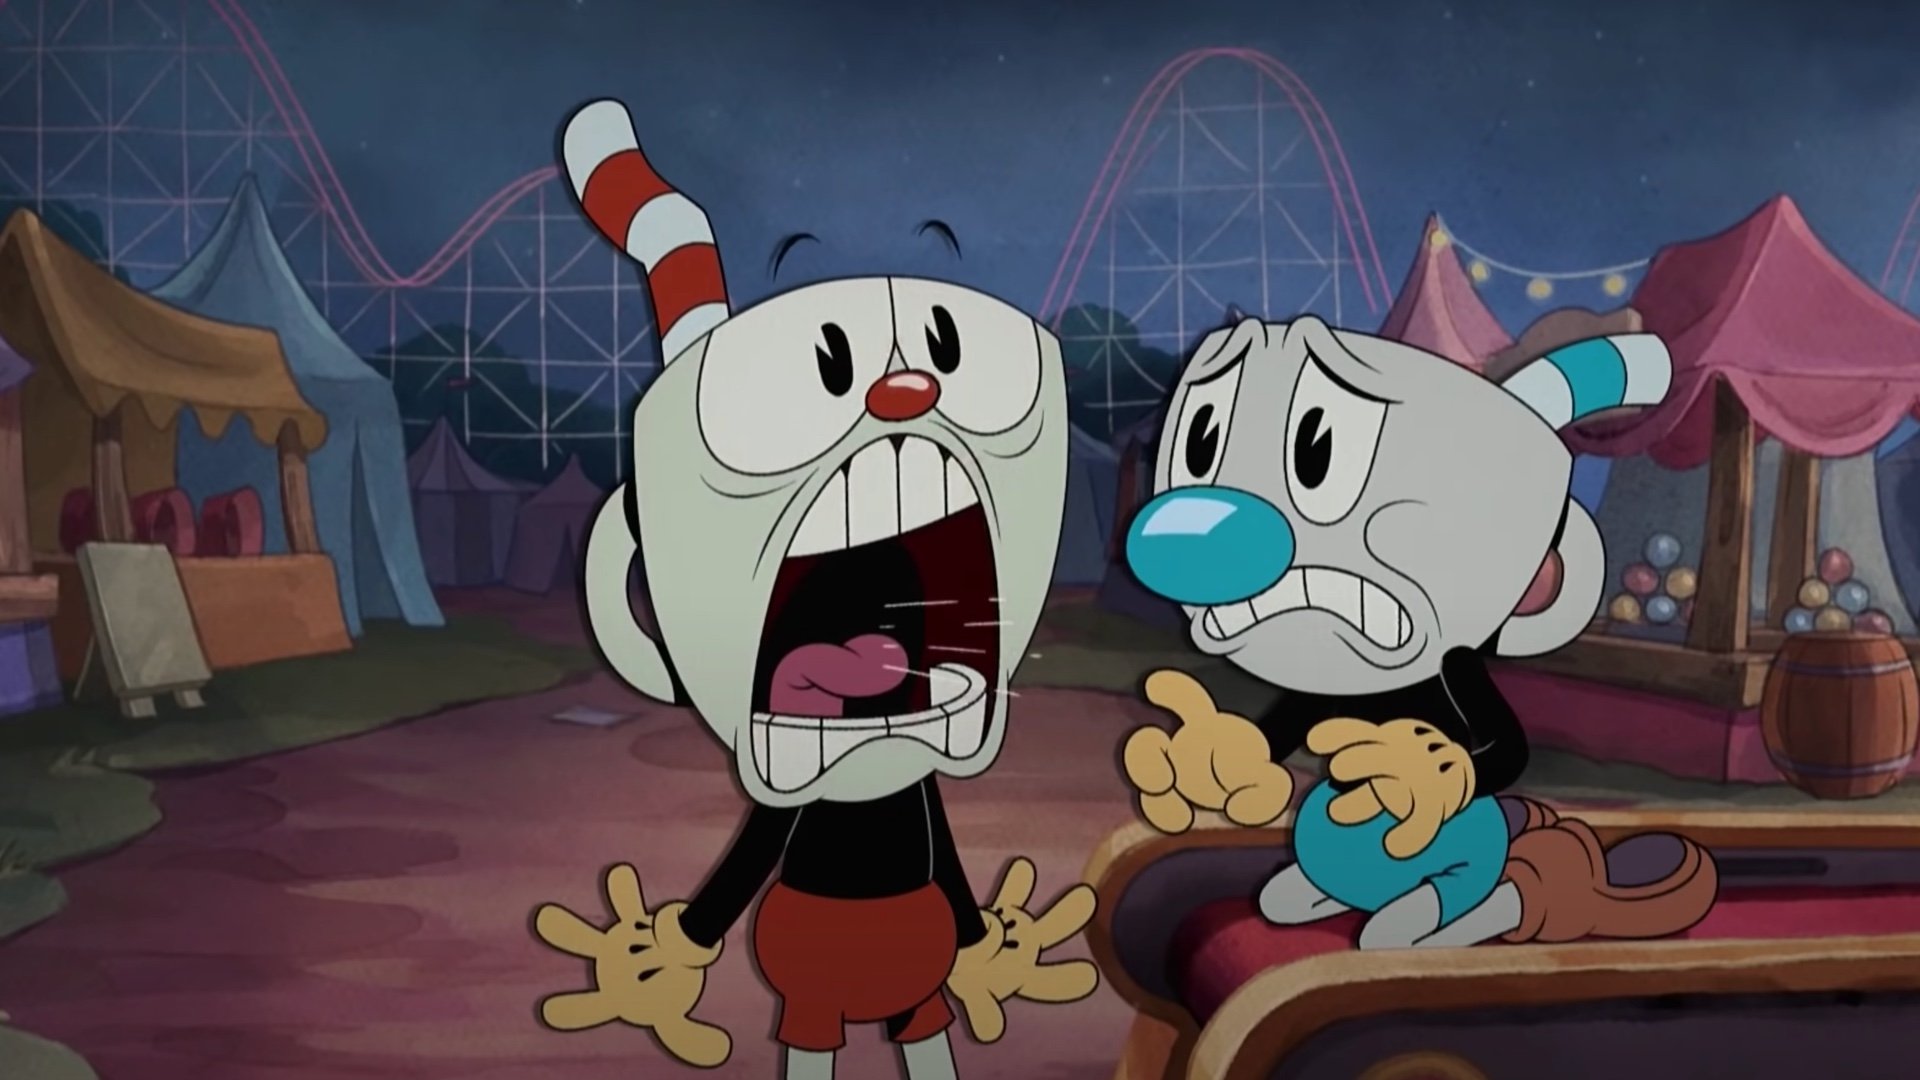 The Cuphead Show Announced for Netflix